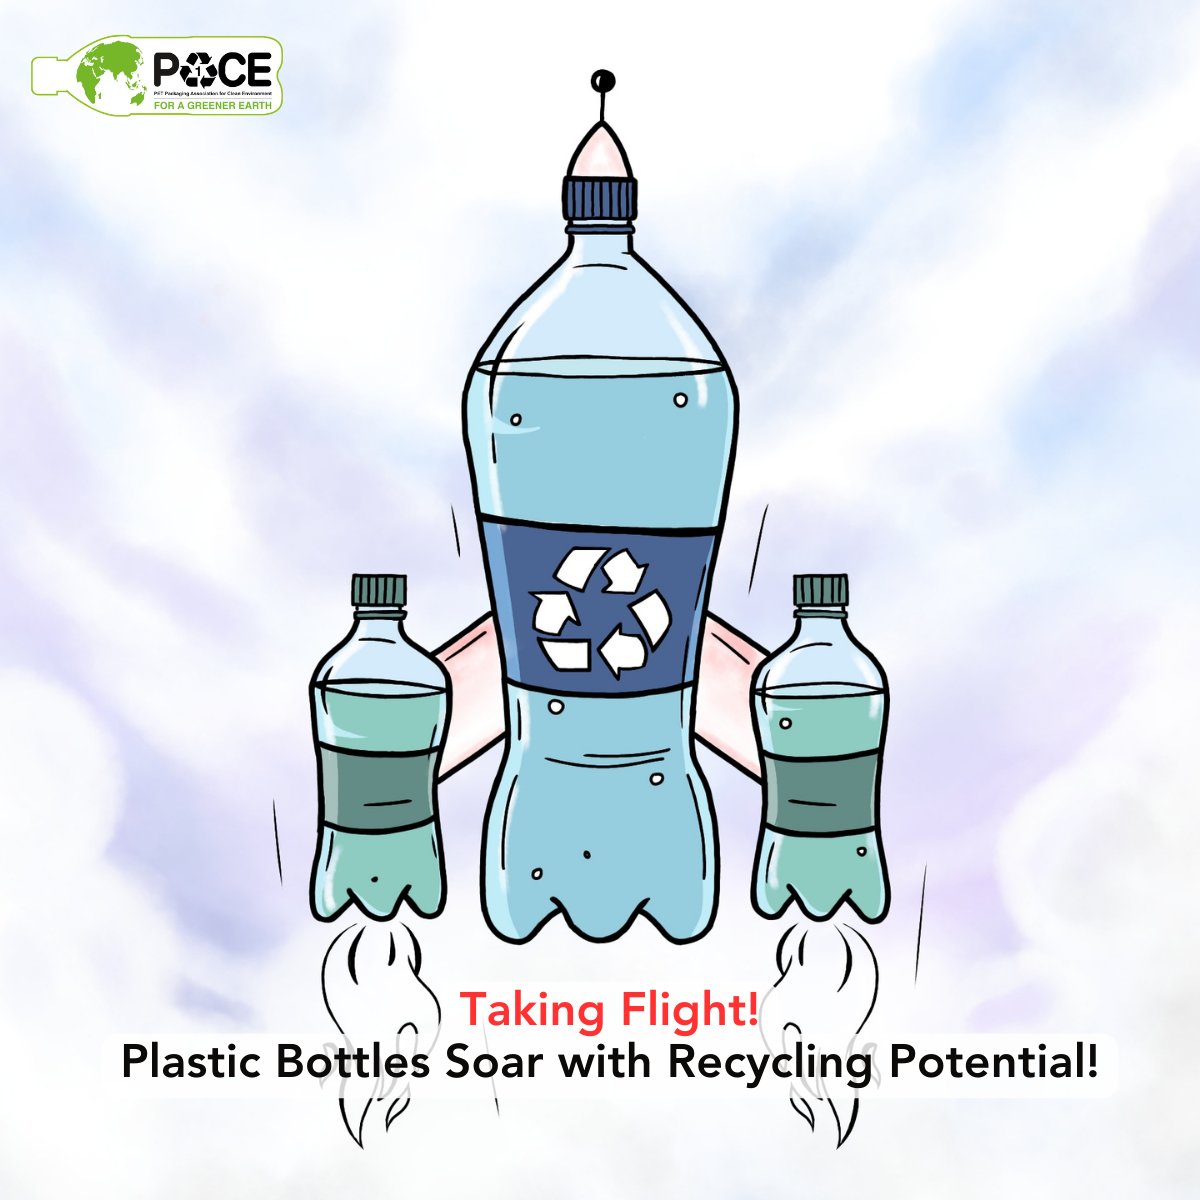 🌟 Let's make a positive impact on our environment by keeping plastic bottles out of landfills and transforming them into something remarkable. 

✈️🌍 Together, we can give them wings and soar toward a more sustainable future. 🌈💚